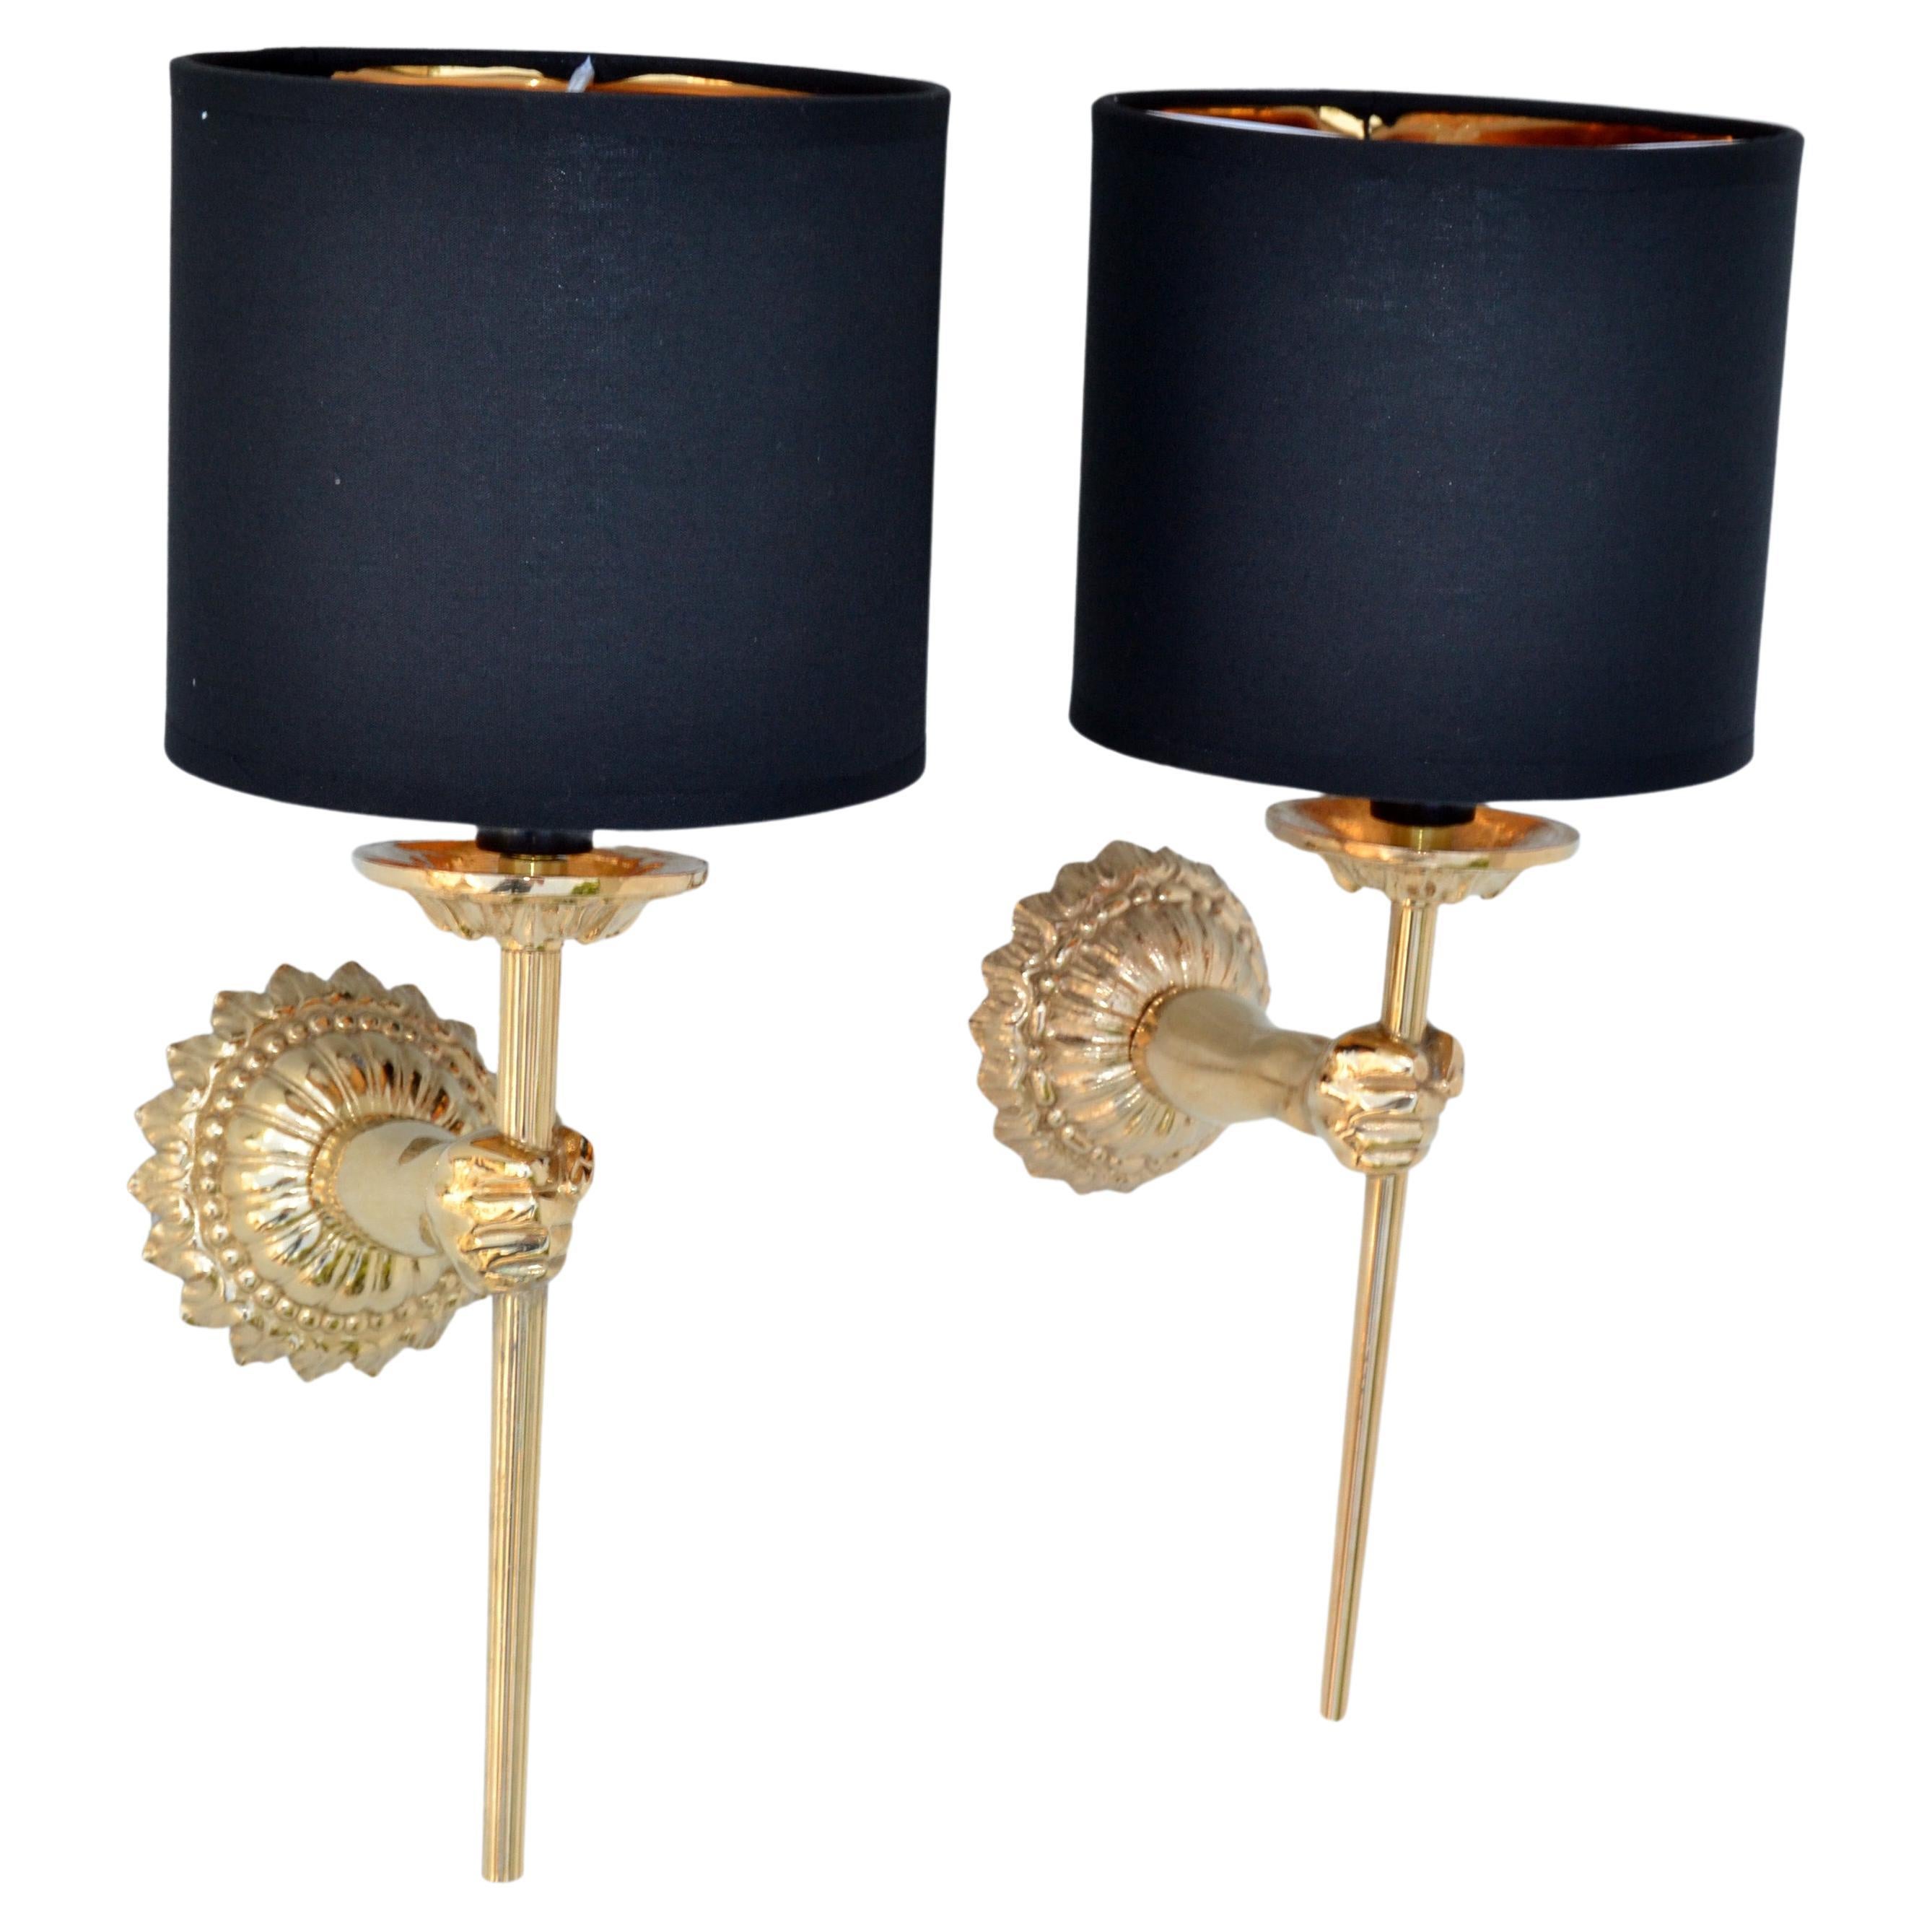 Pair of Maison Lancel gold plated hand sconces, wall lights with gold & black fabric shades.
Mid-Century Modern Neoclassical Design from France and made in the 1960.
US rewired and in working condition, each Sconce takes a max. 40 watts candelabra